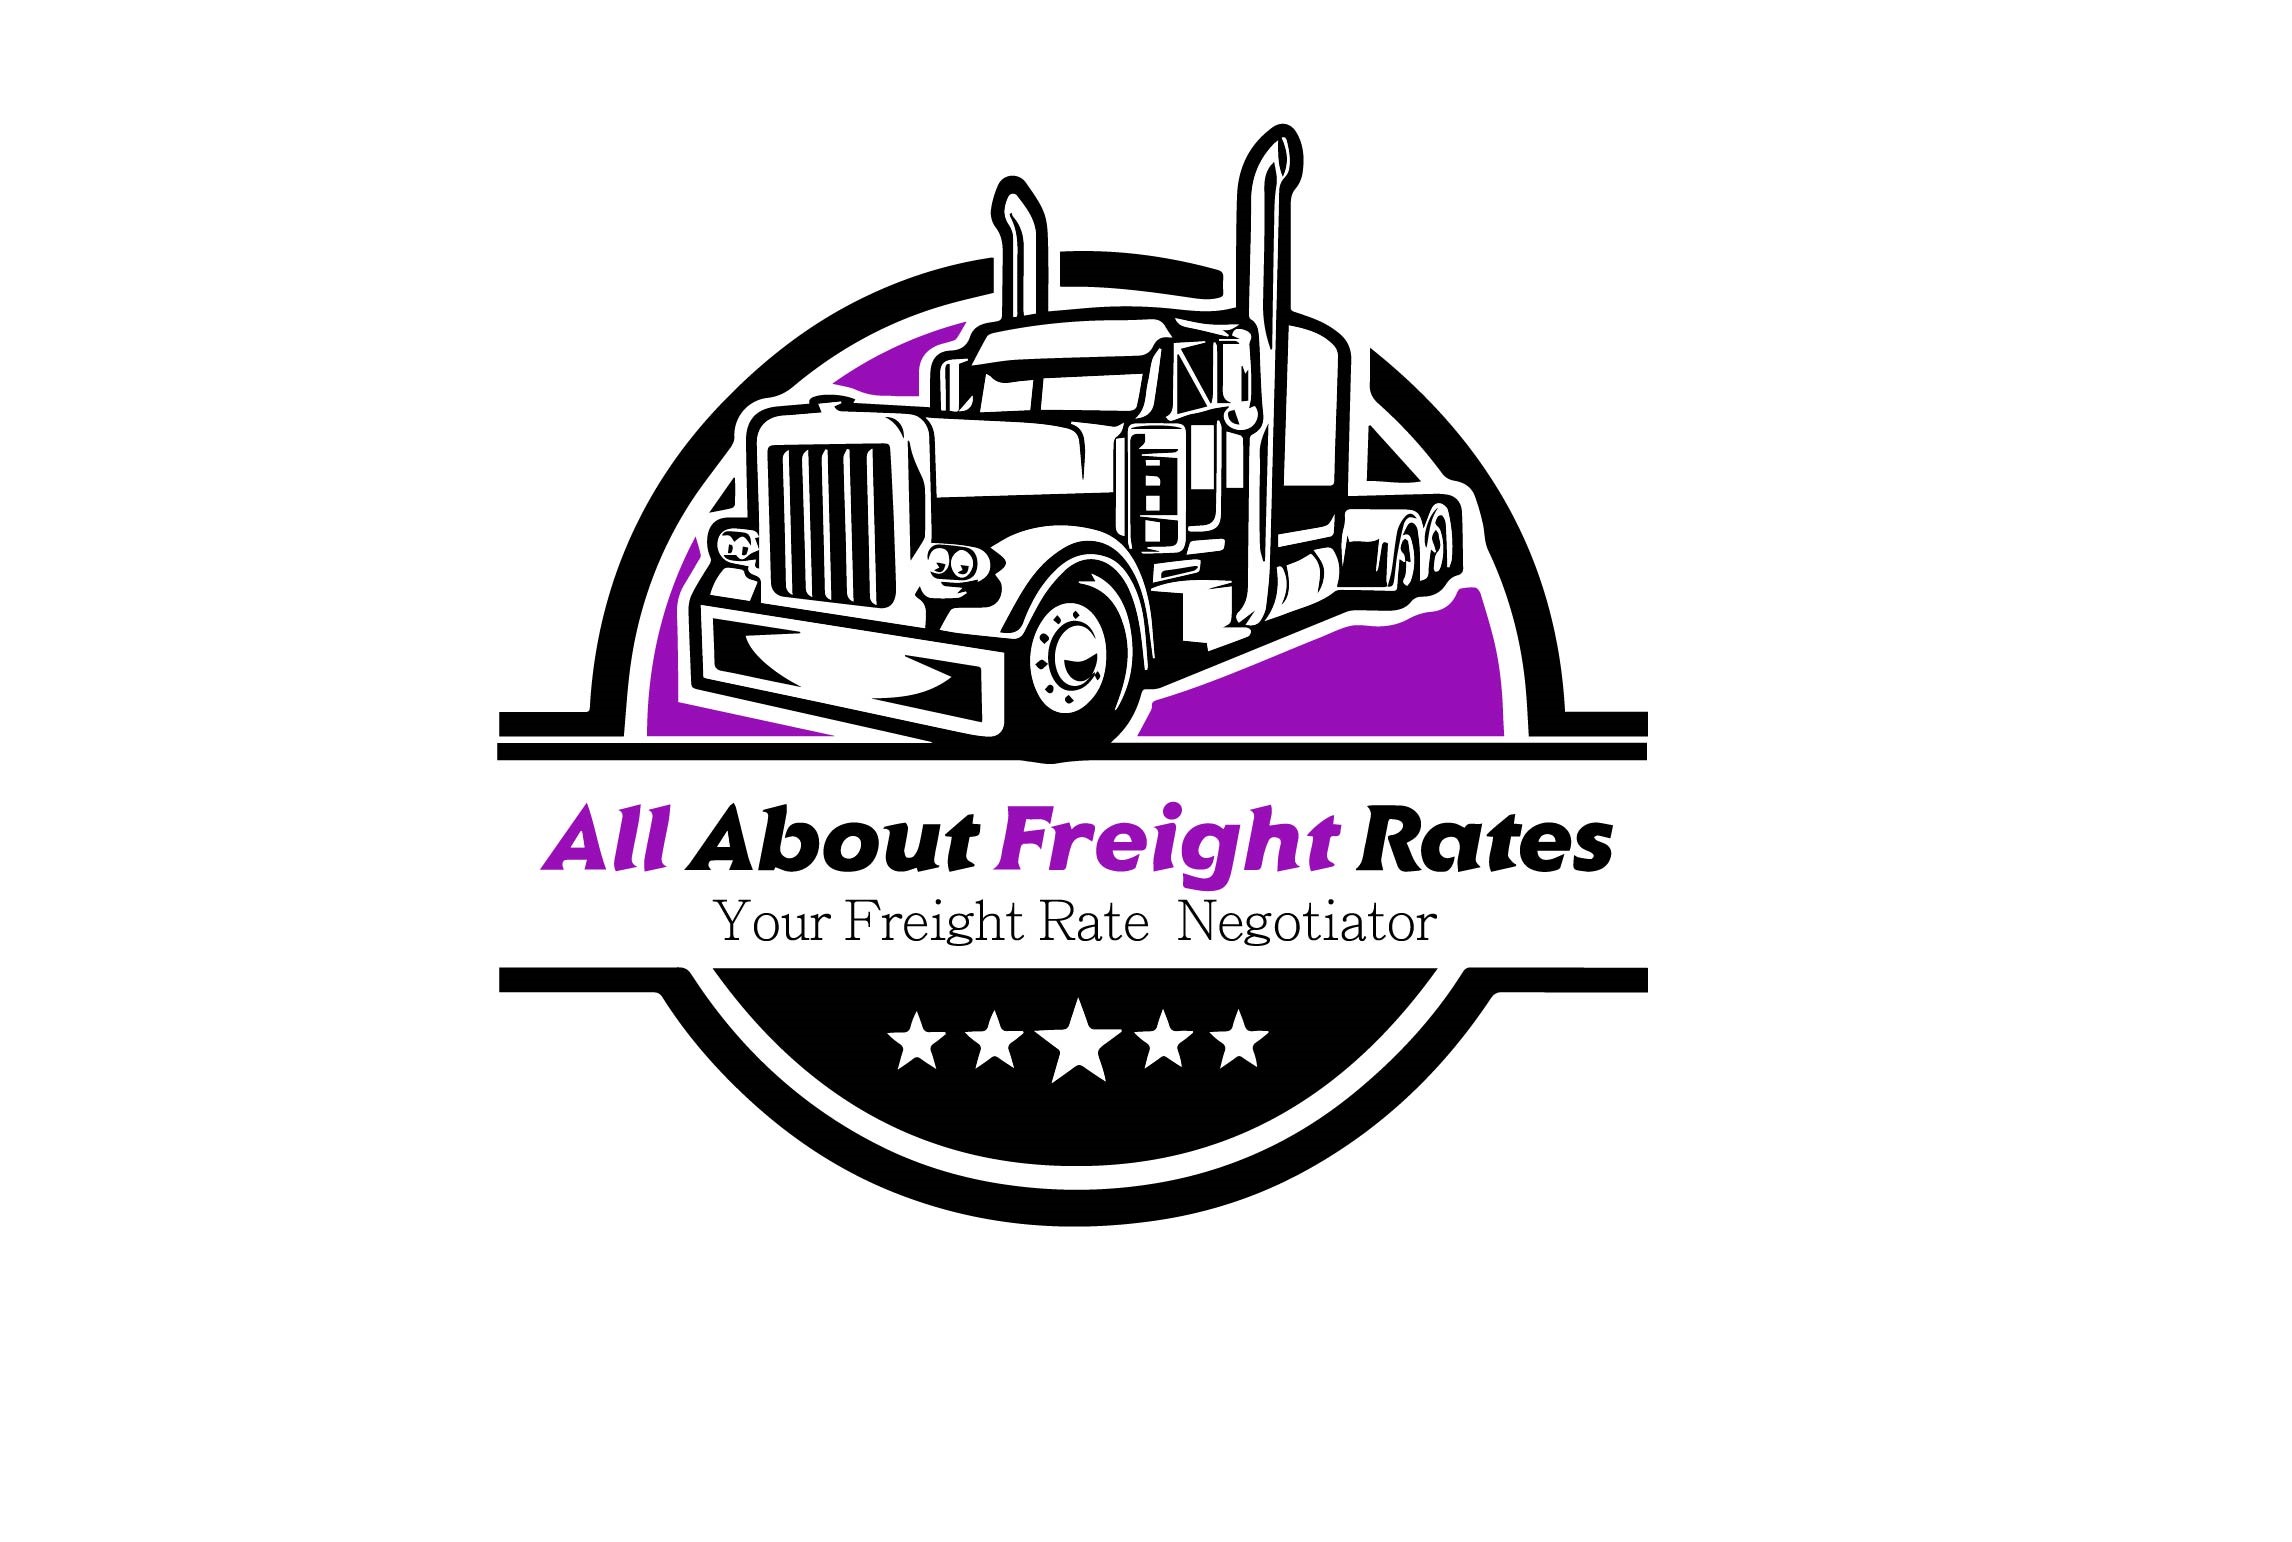 All About Freight Rates LLC